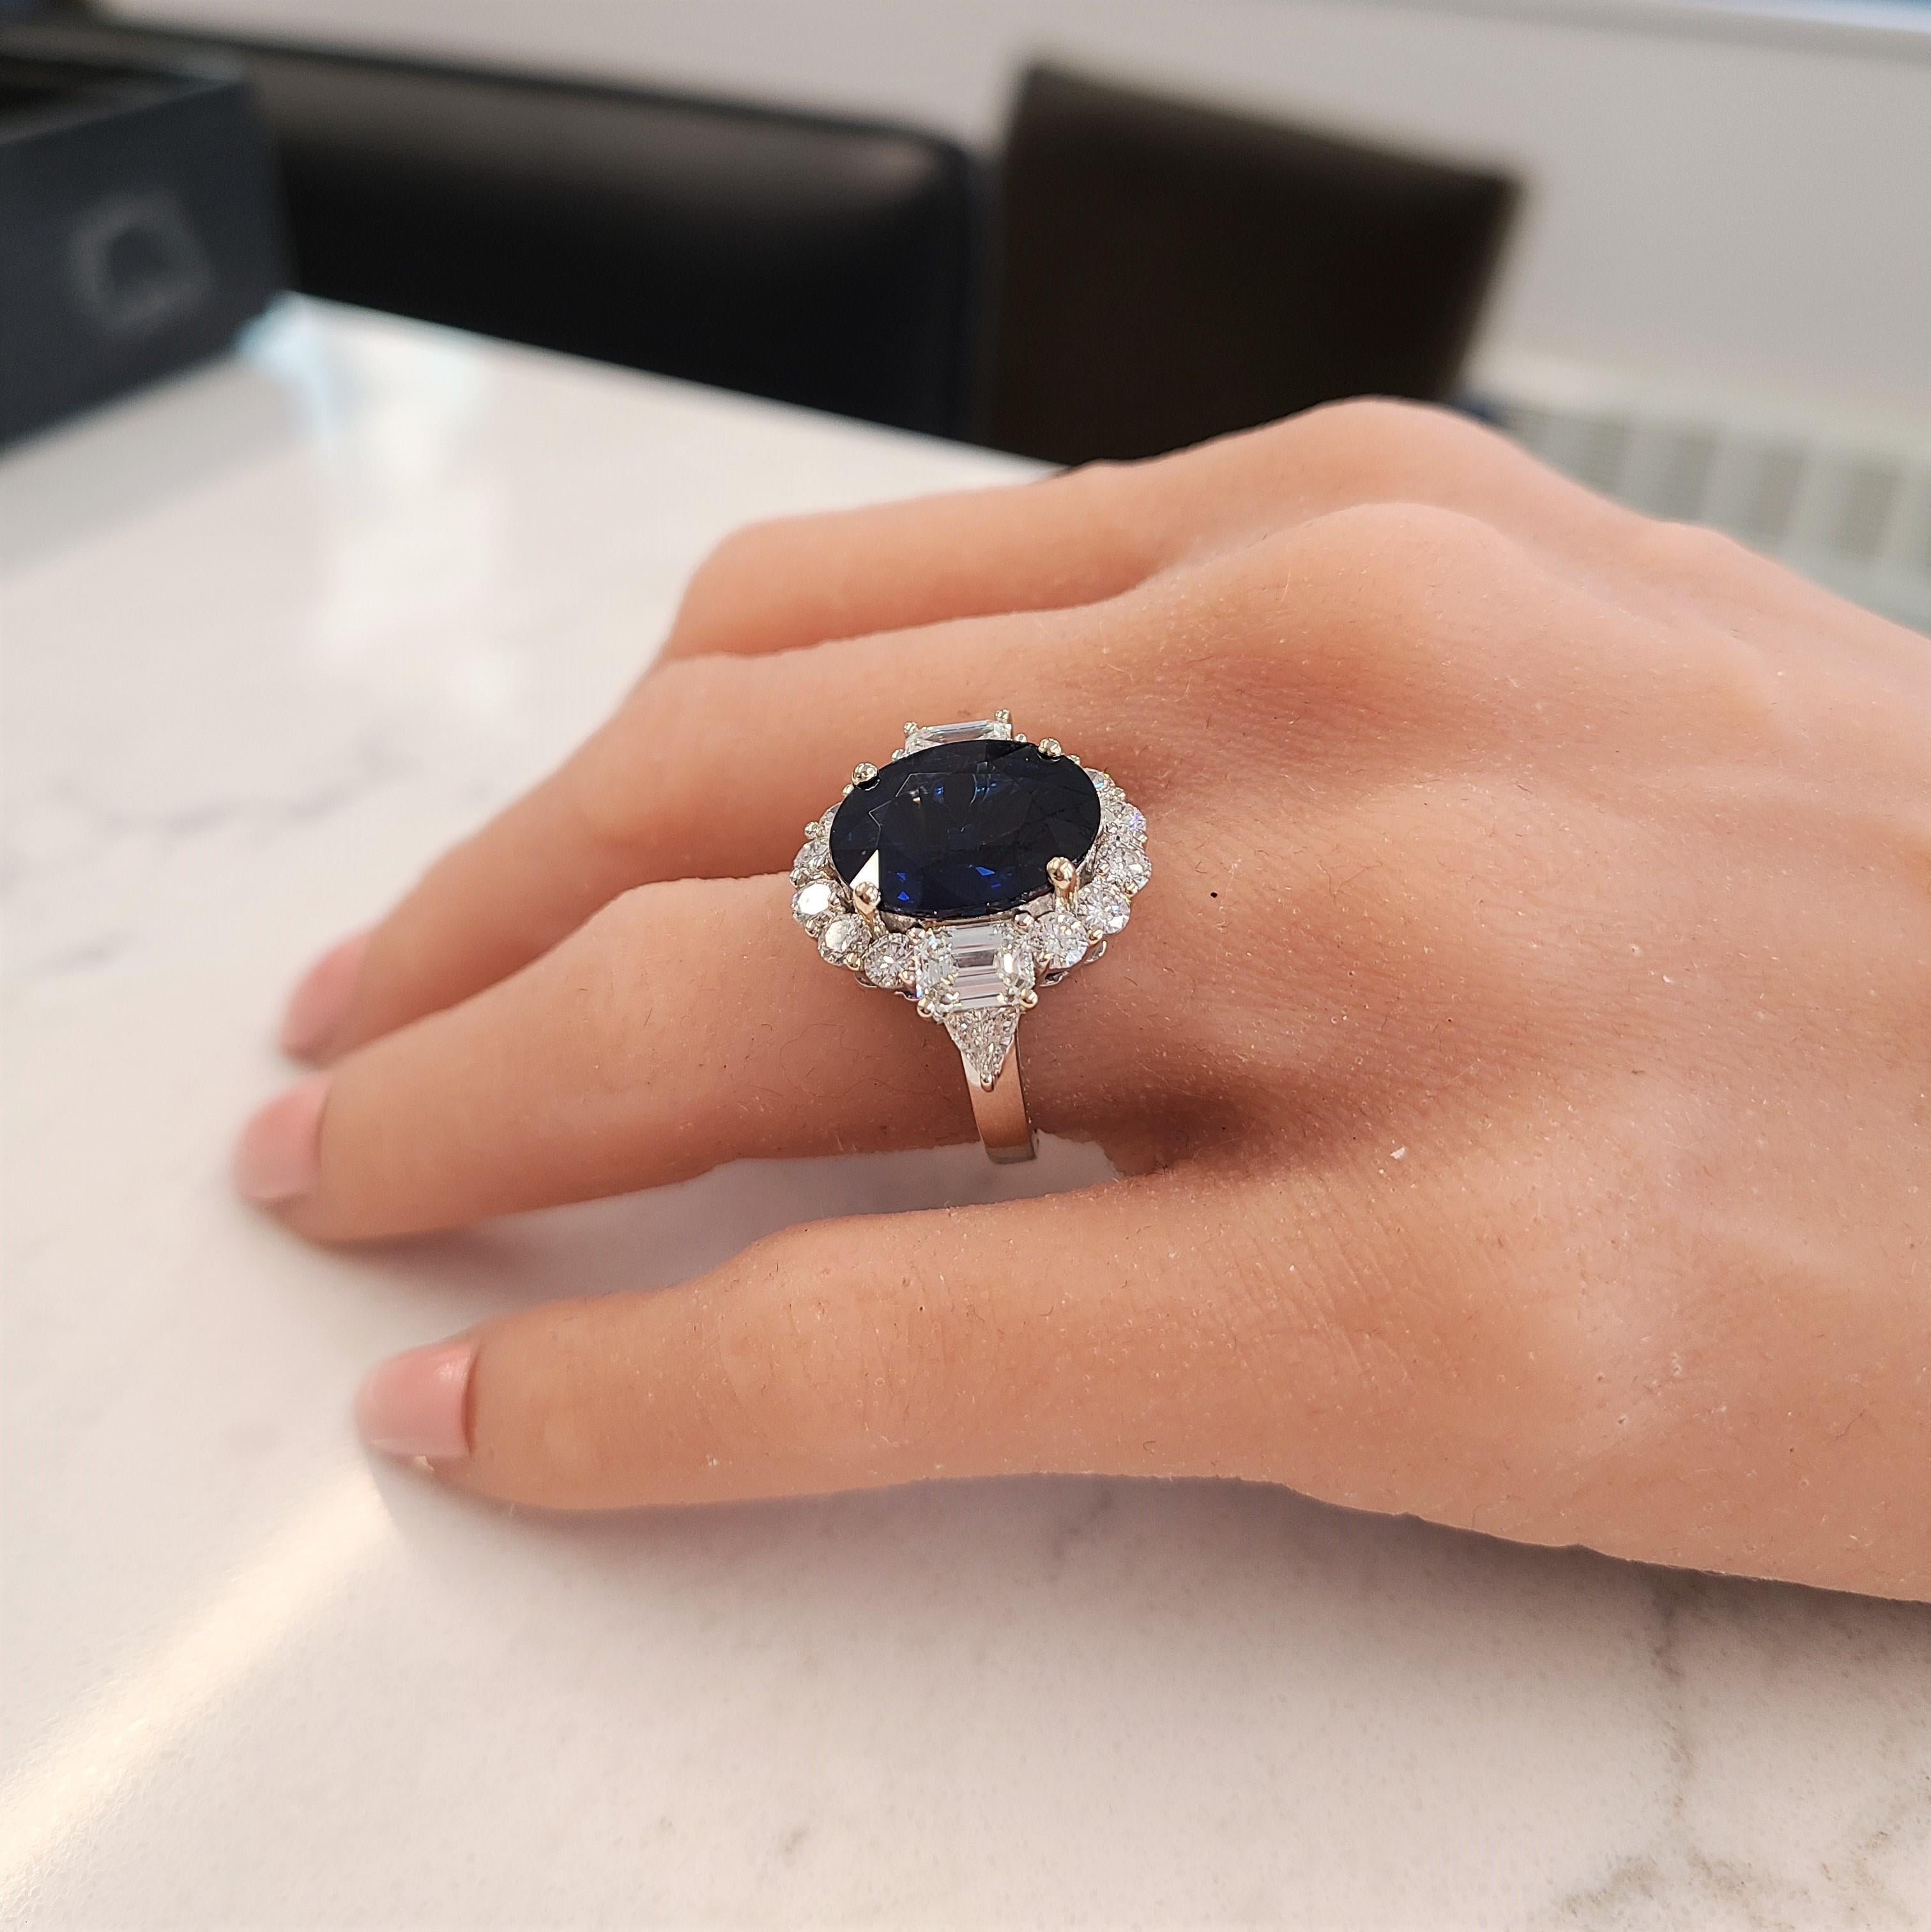 This is an example of what premiere craftsmanship with high-quality precious gemstones and diamonds really is. A GIA certified 8.74 carat blue sapphire takes center stage in a prong setting measuring 14.85-11.47mm. Its gem source is Sri Lanka; its